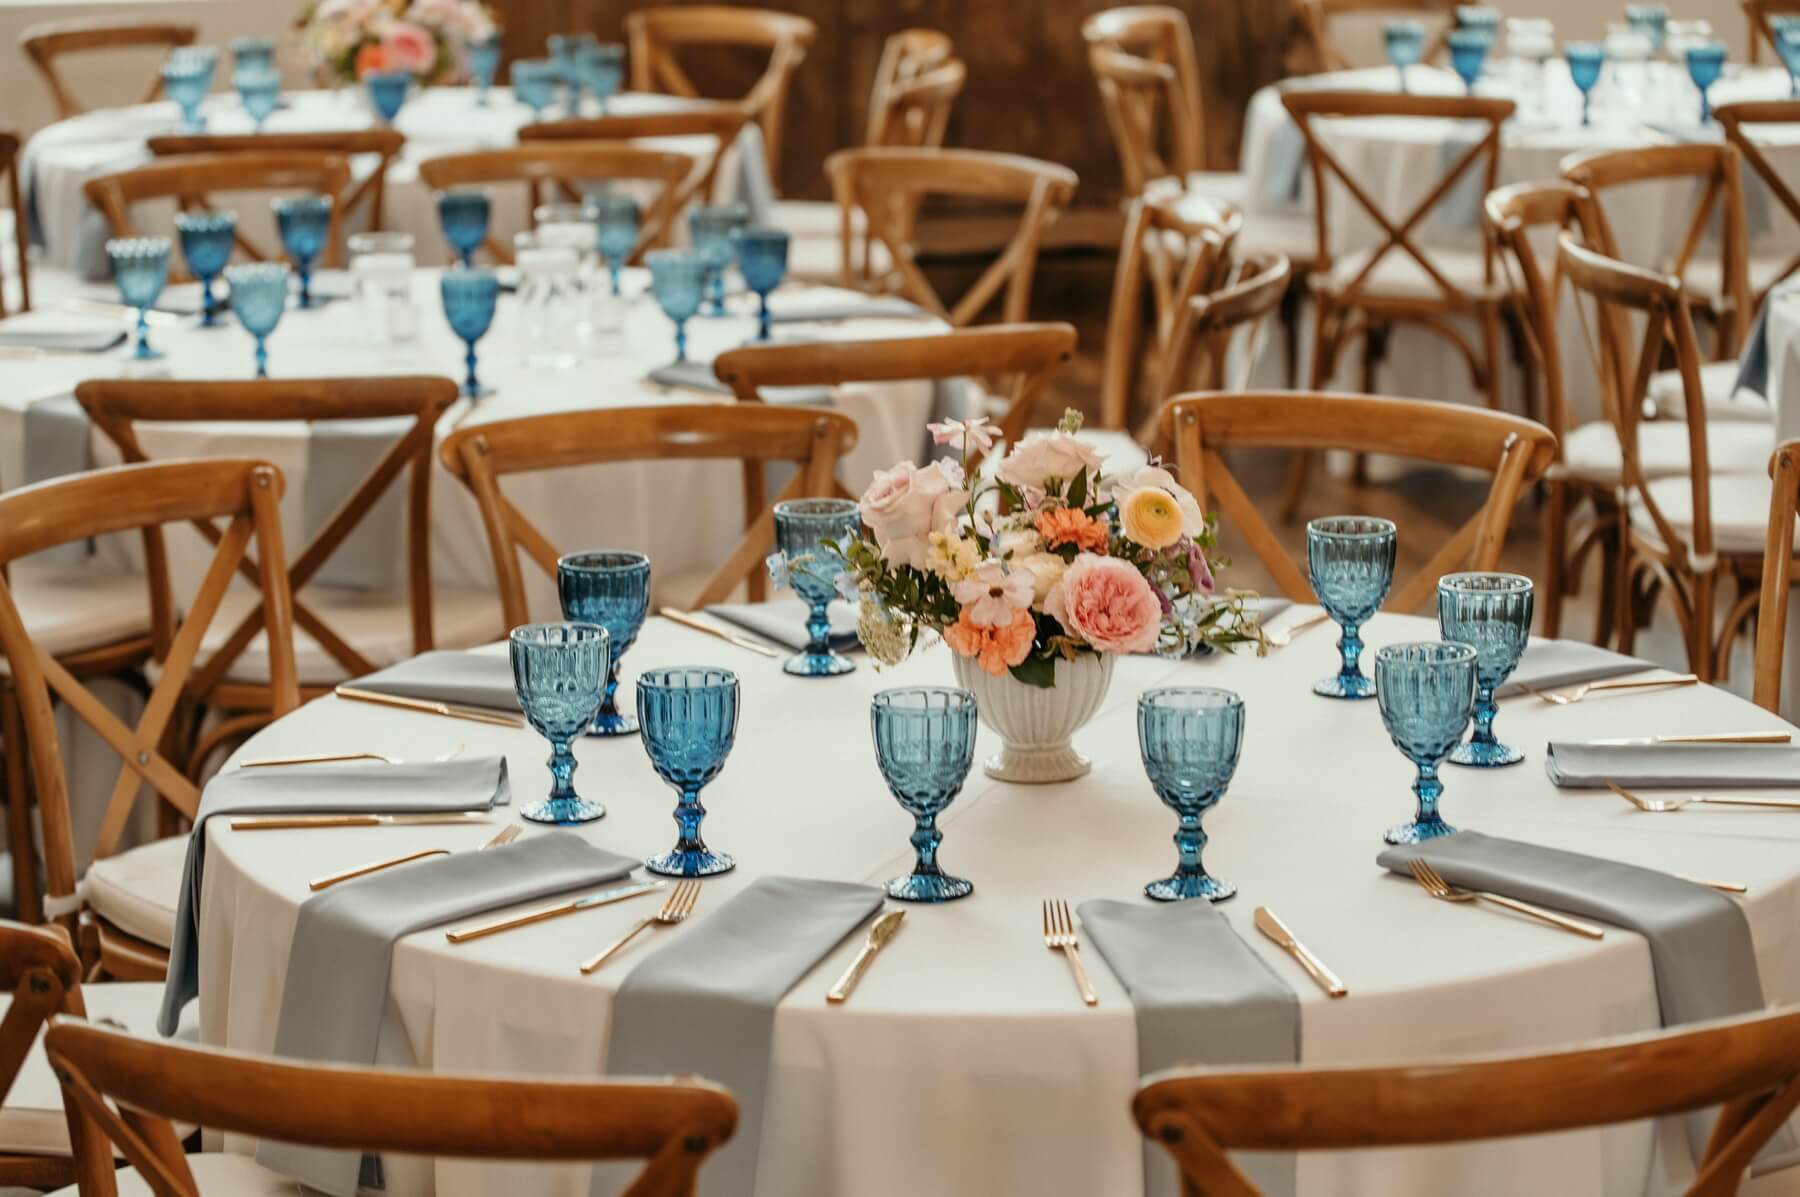 Circle table with blue water glasses, blue napkins, and colorful flowers